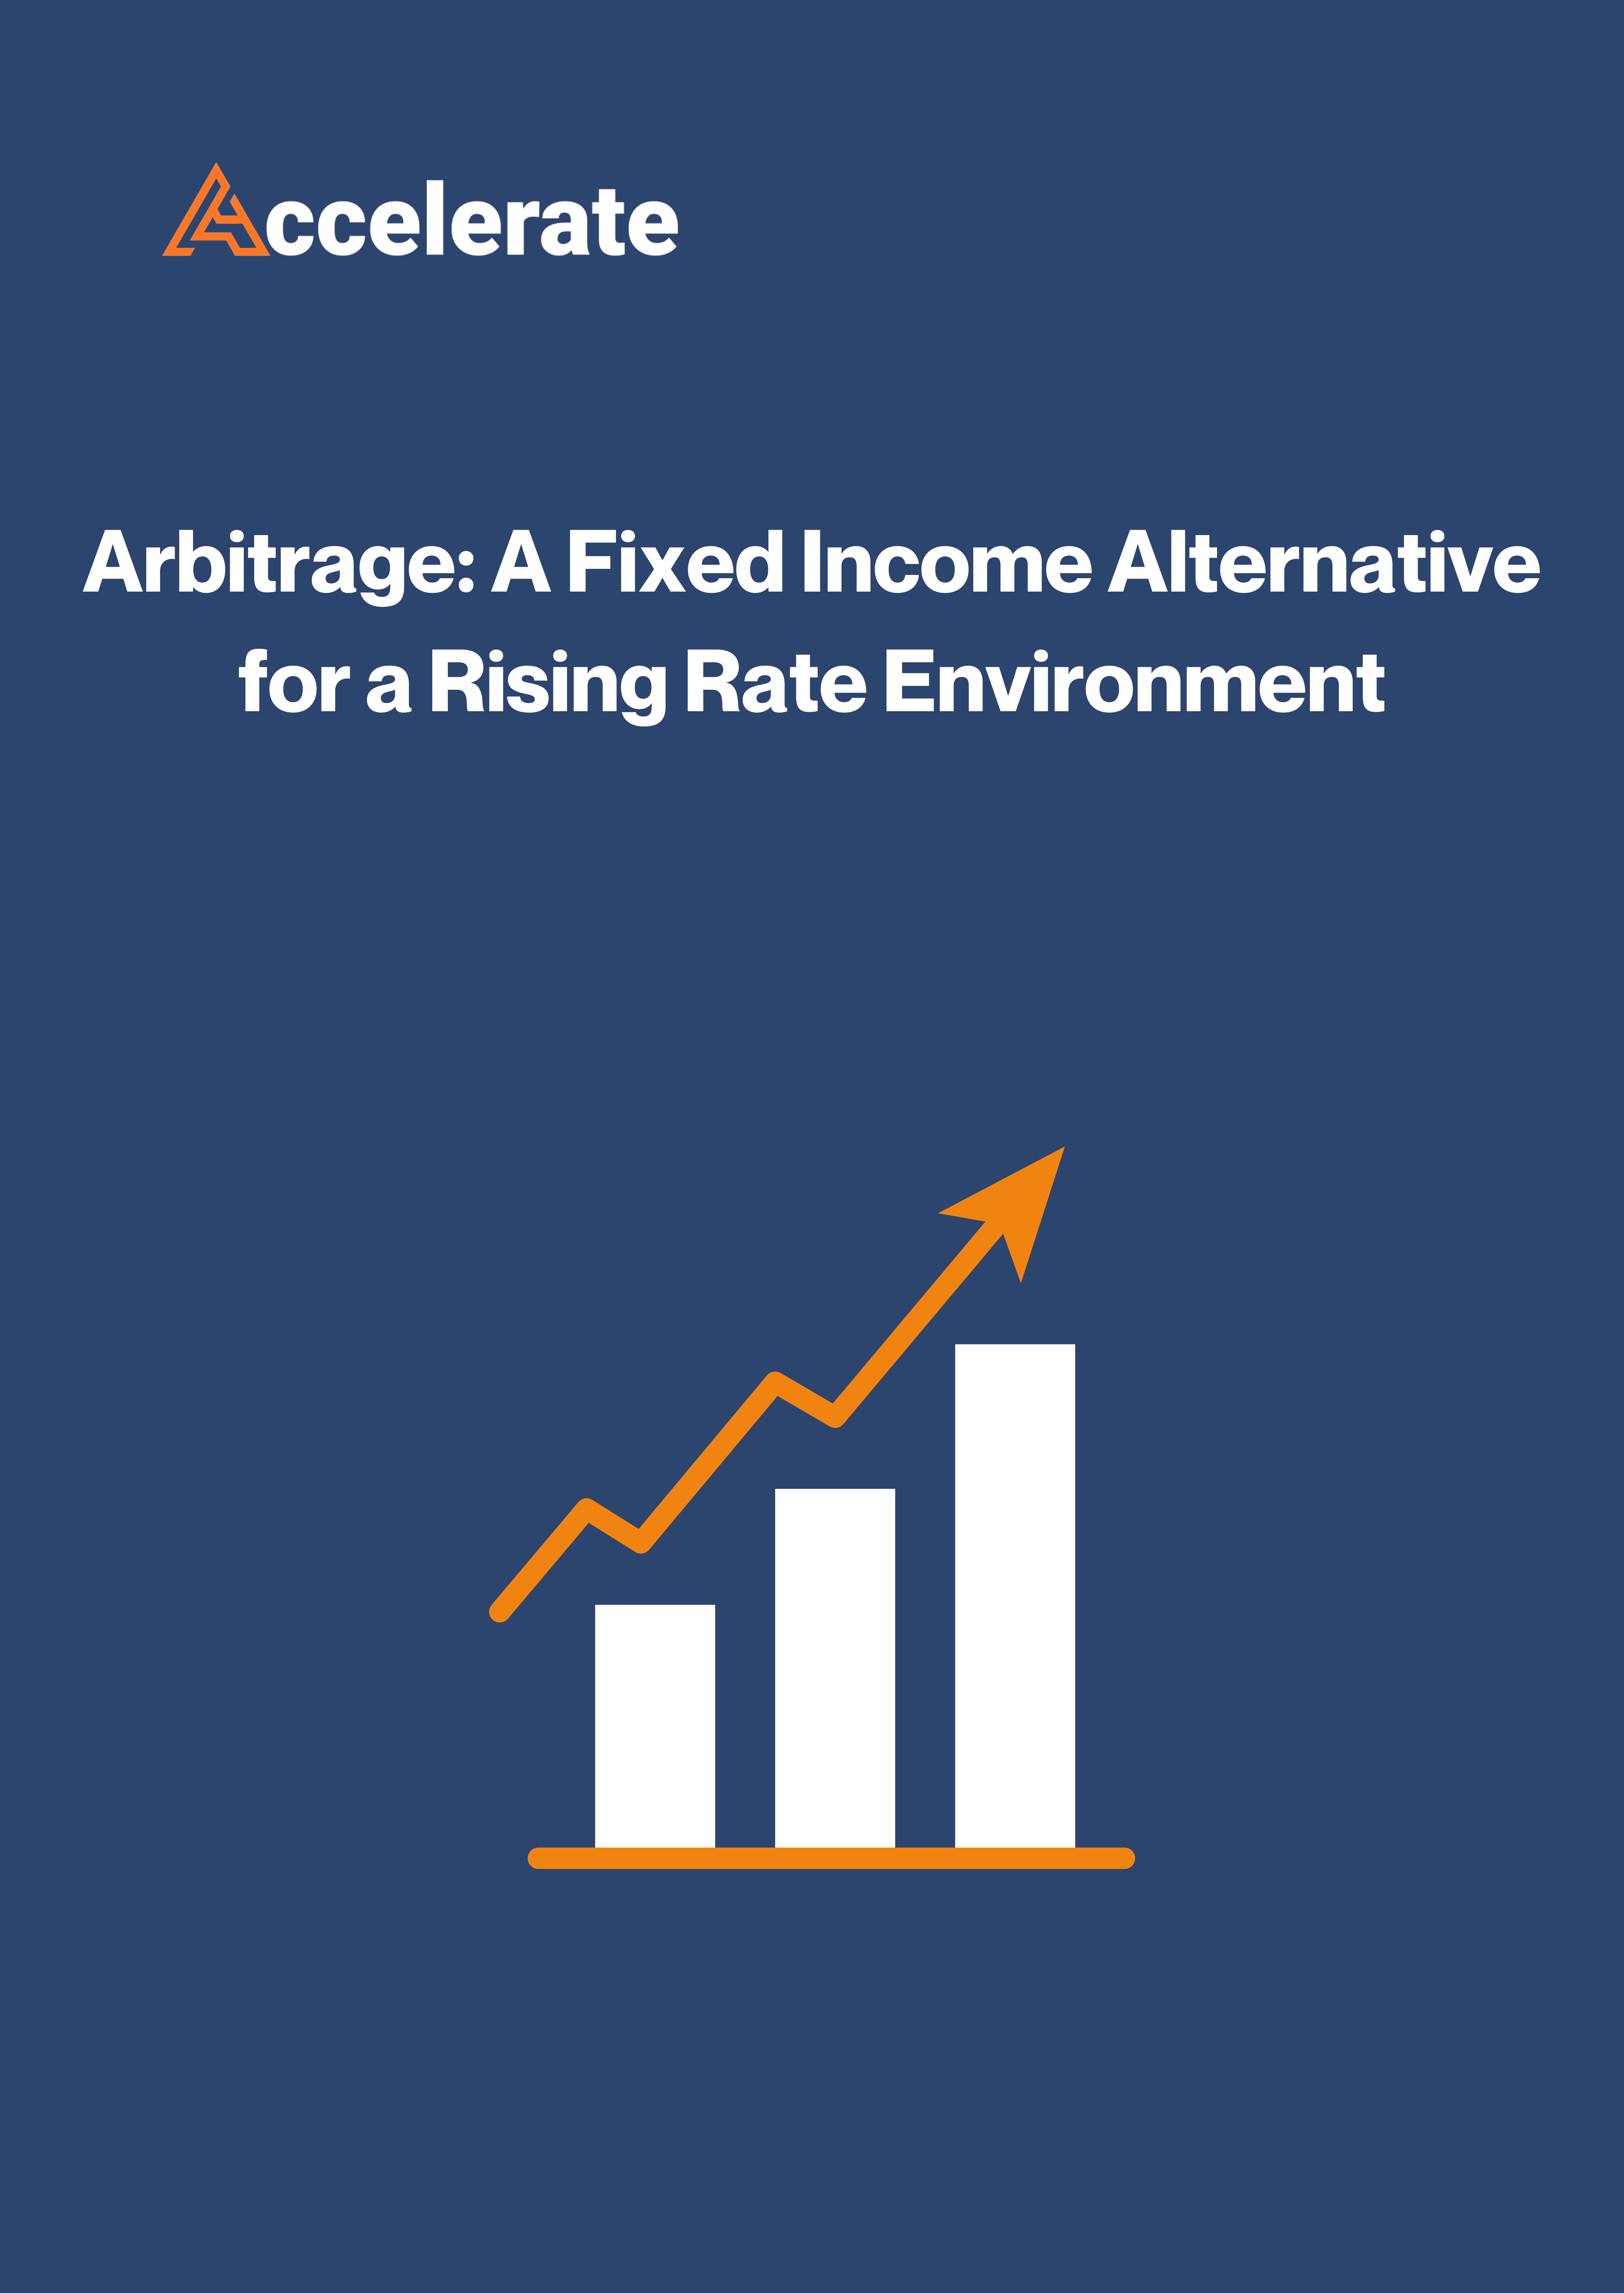 Arbitrage: A Fixed Income Alternative for a Rising Rate Environment